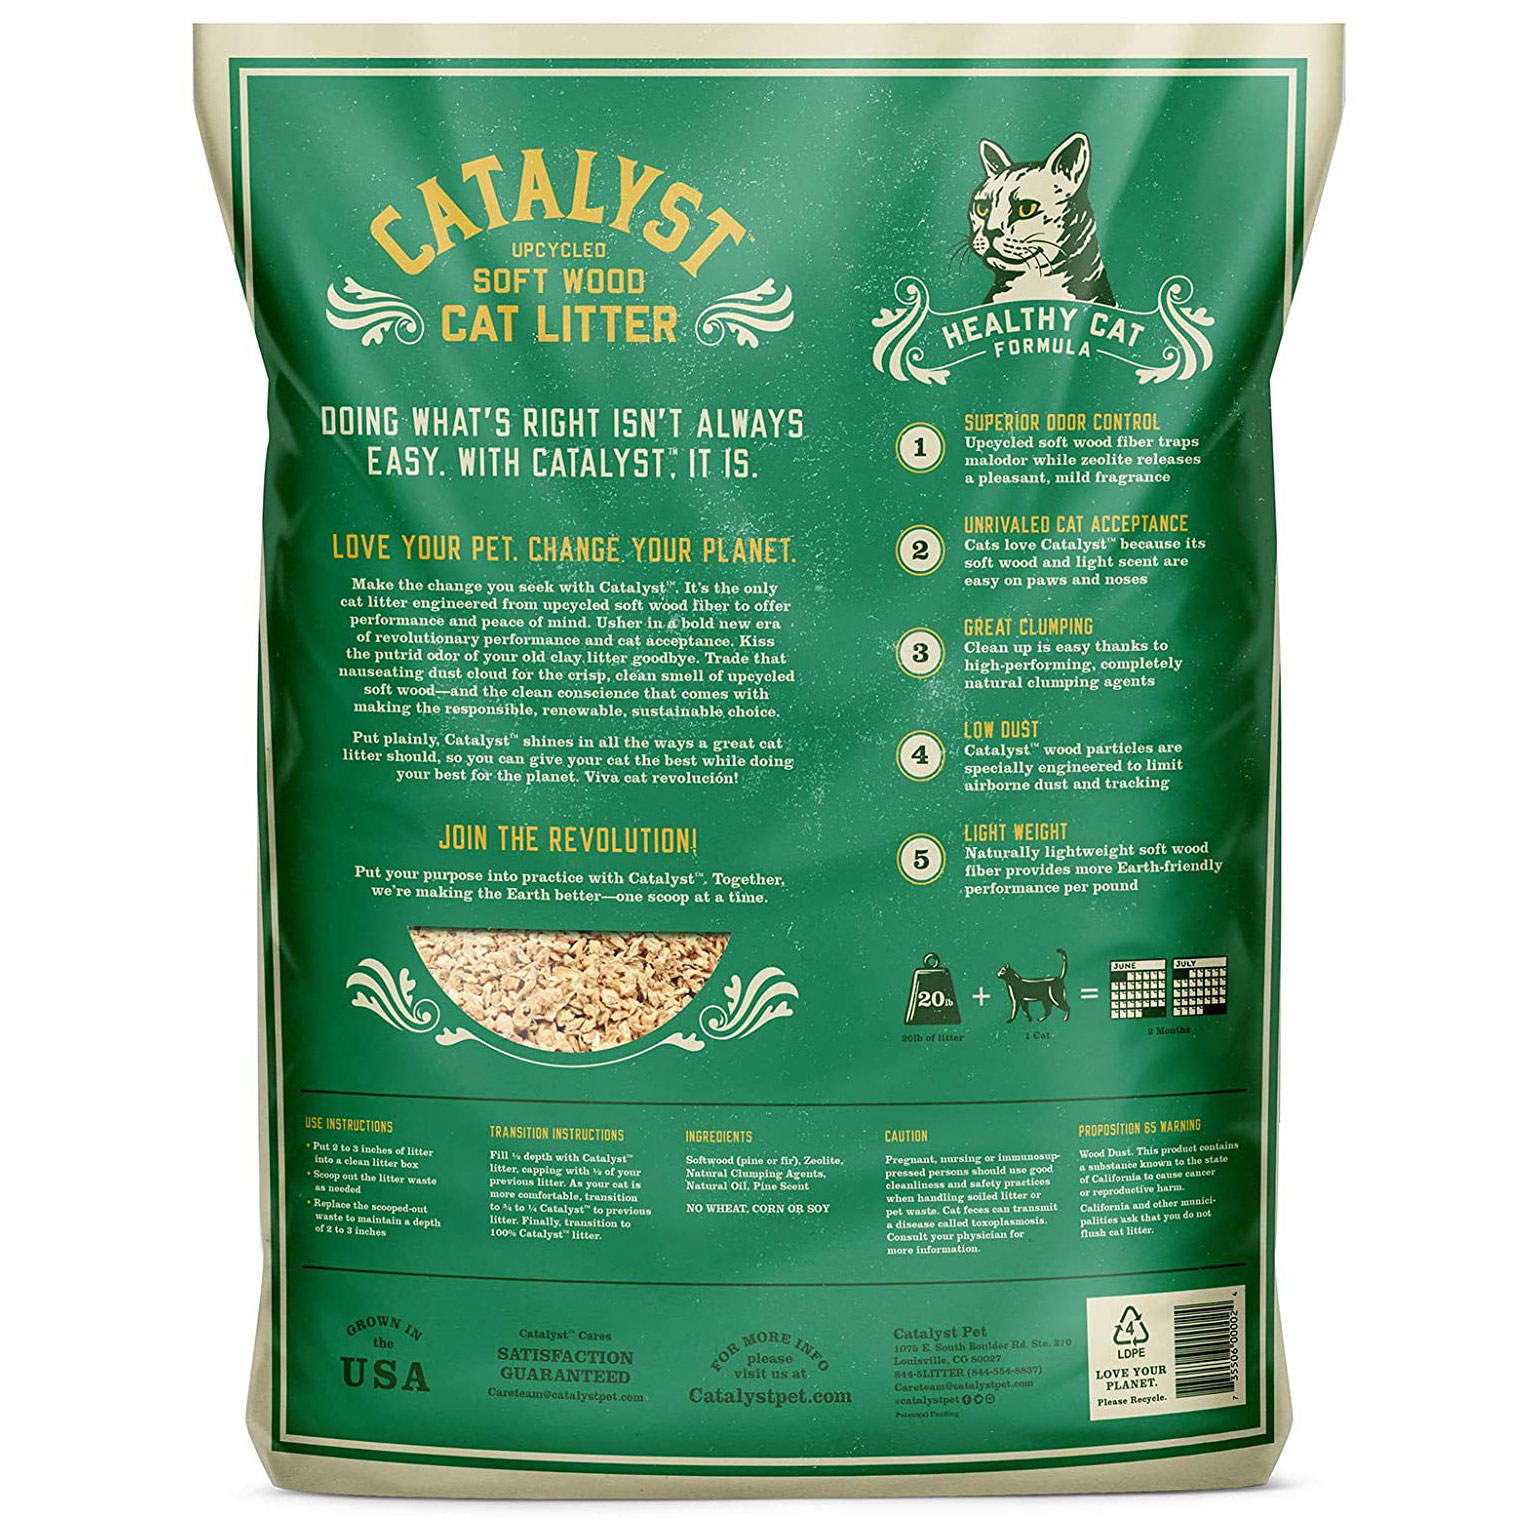 Catalyst Upcycled Soft Wood Cat Litter Odor Control Healthy Cat Formula